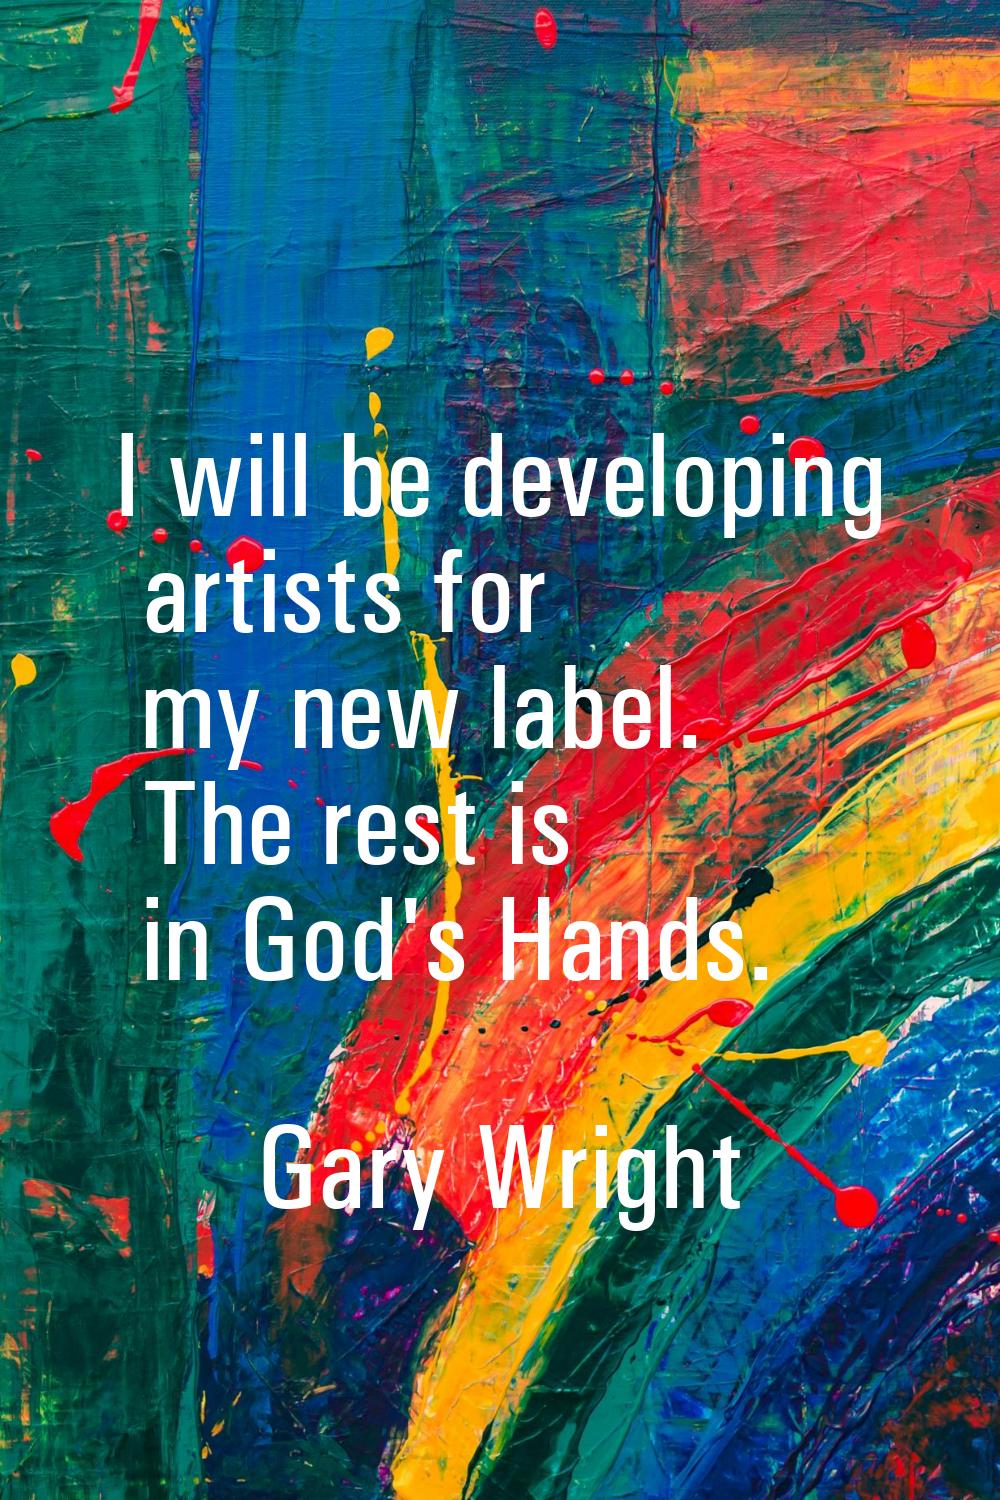 I will be developing artists for my new label. The rest is in God's Hands.